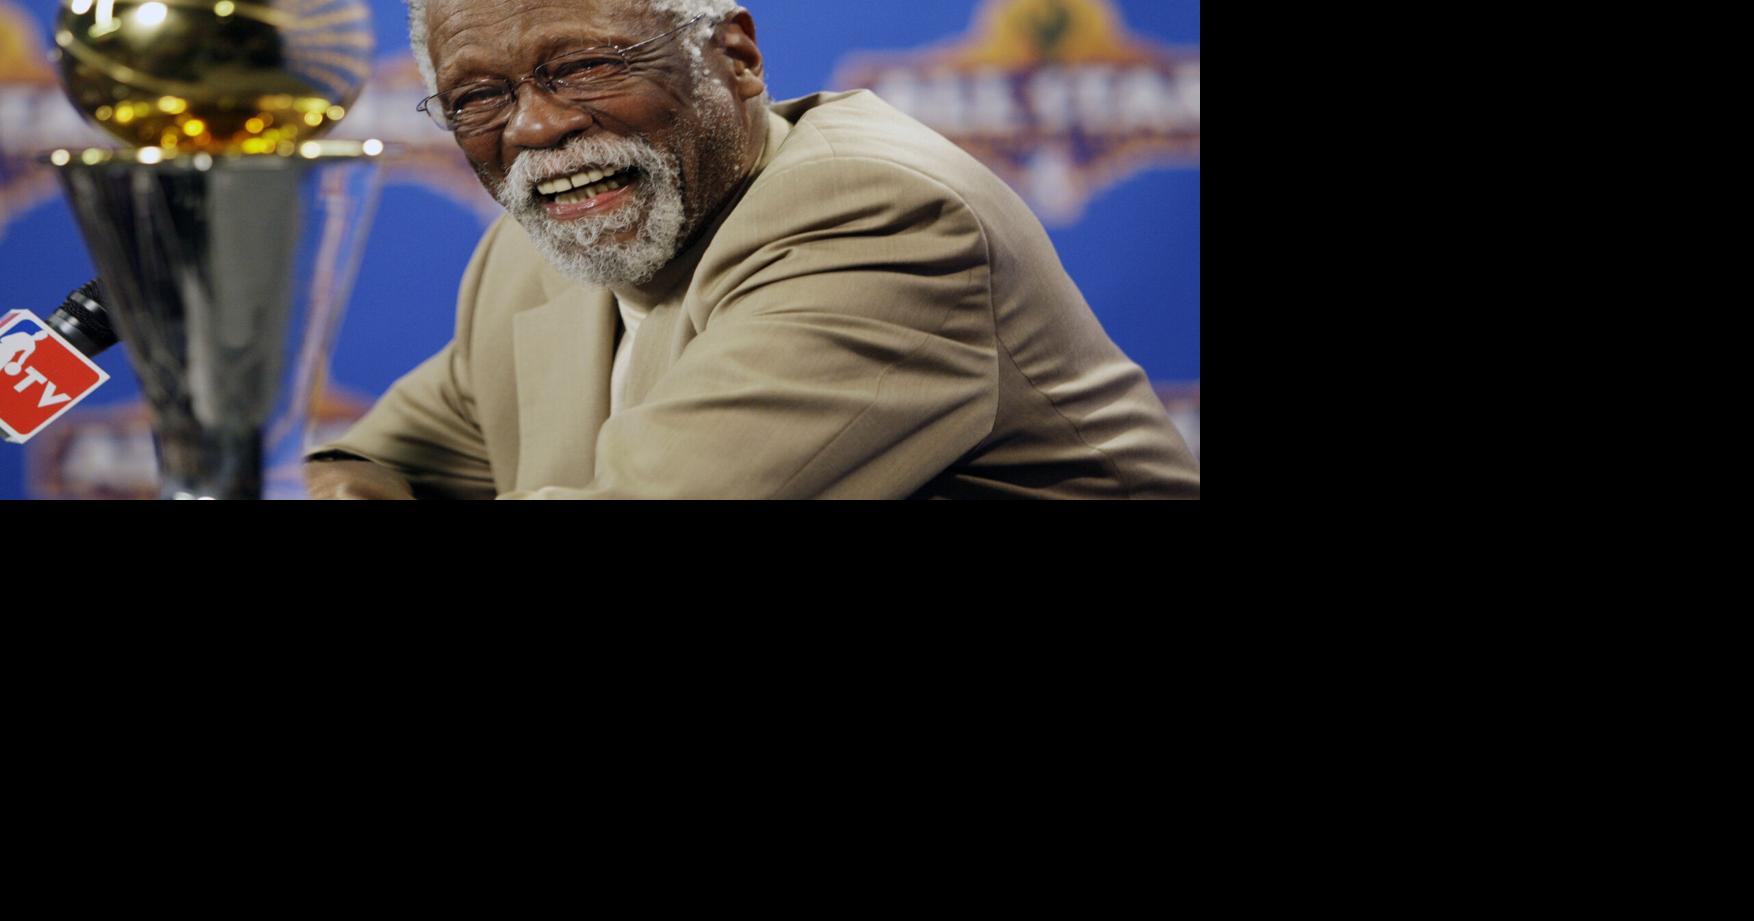 NBA unveils No. 6 patch to honor Bill Russell across league